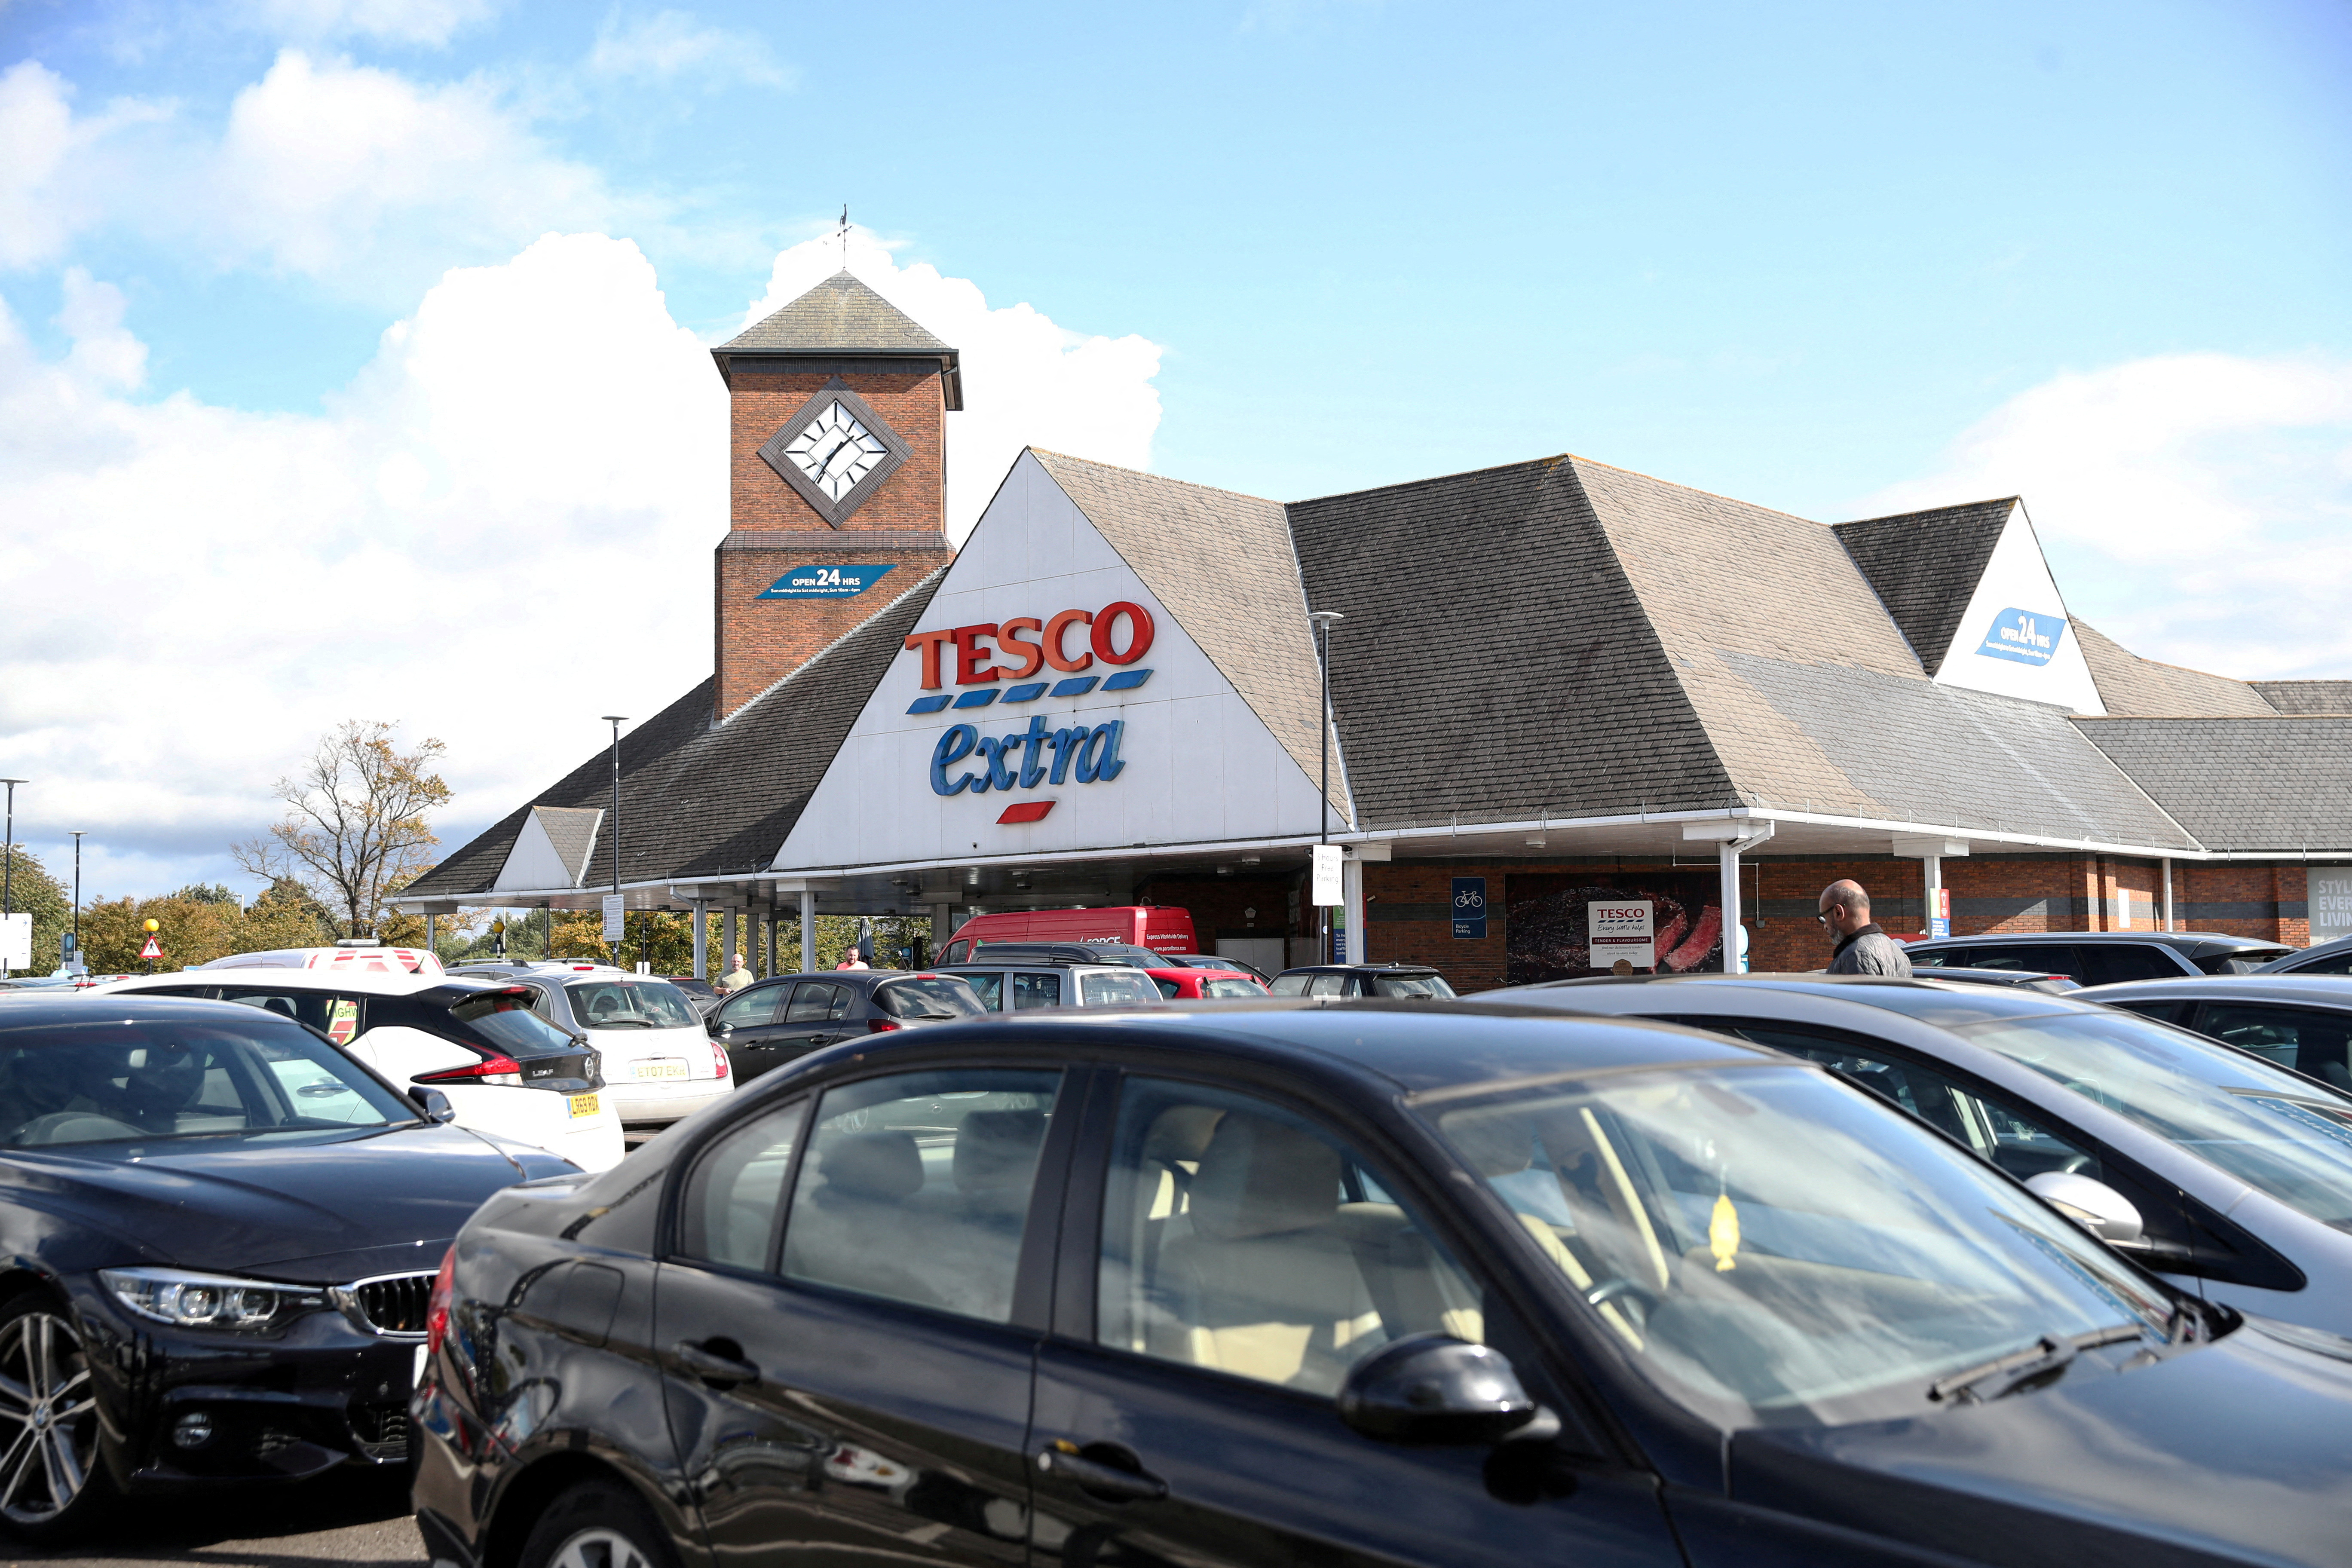 Vehicles are pictured outside a Tesco supermarket in Hatfield